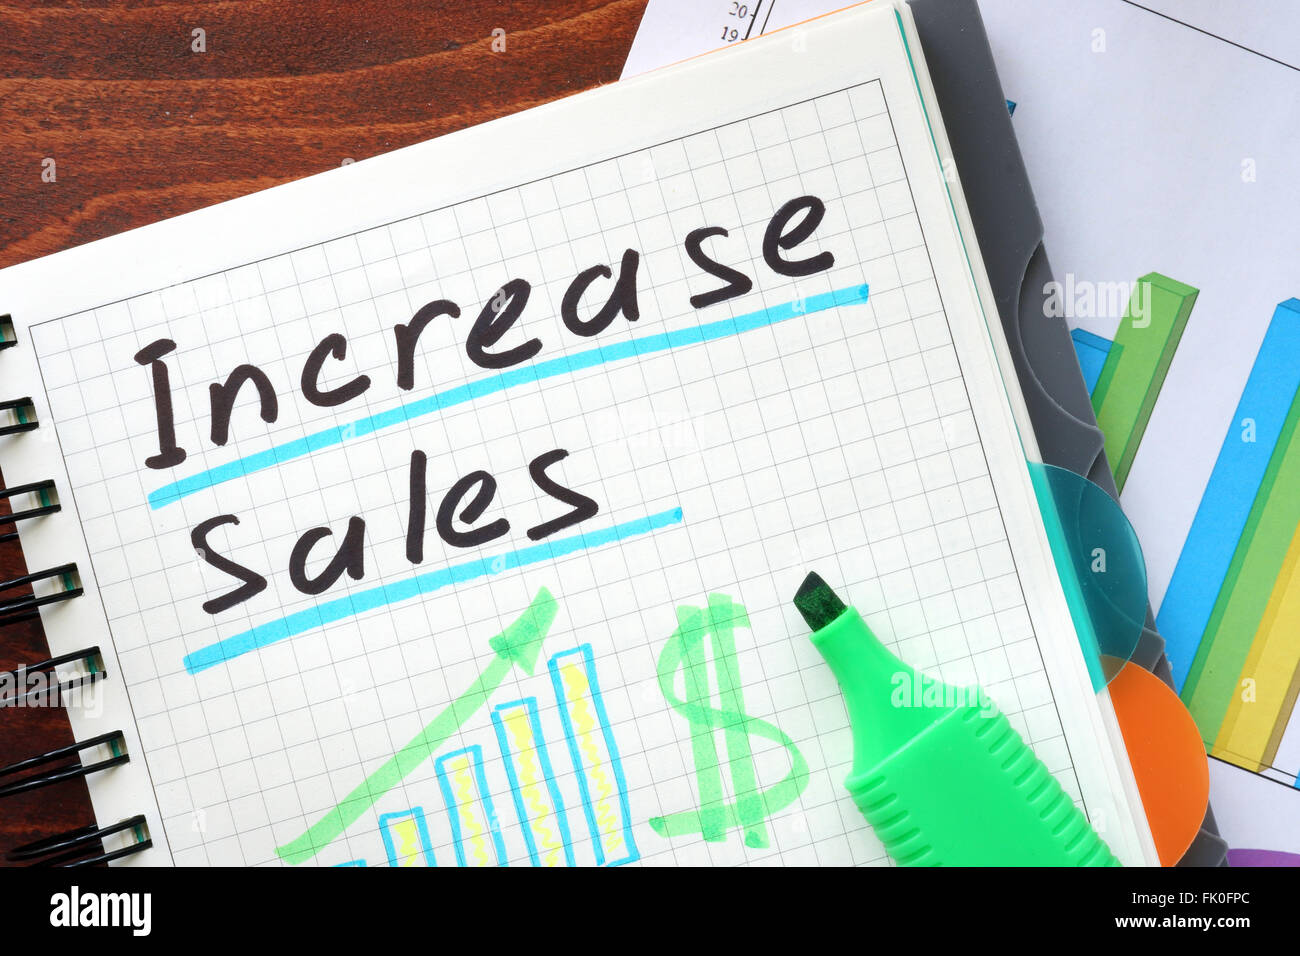 Increase sales concept  written in a notebook on a wooden table. Stock Photo